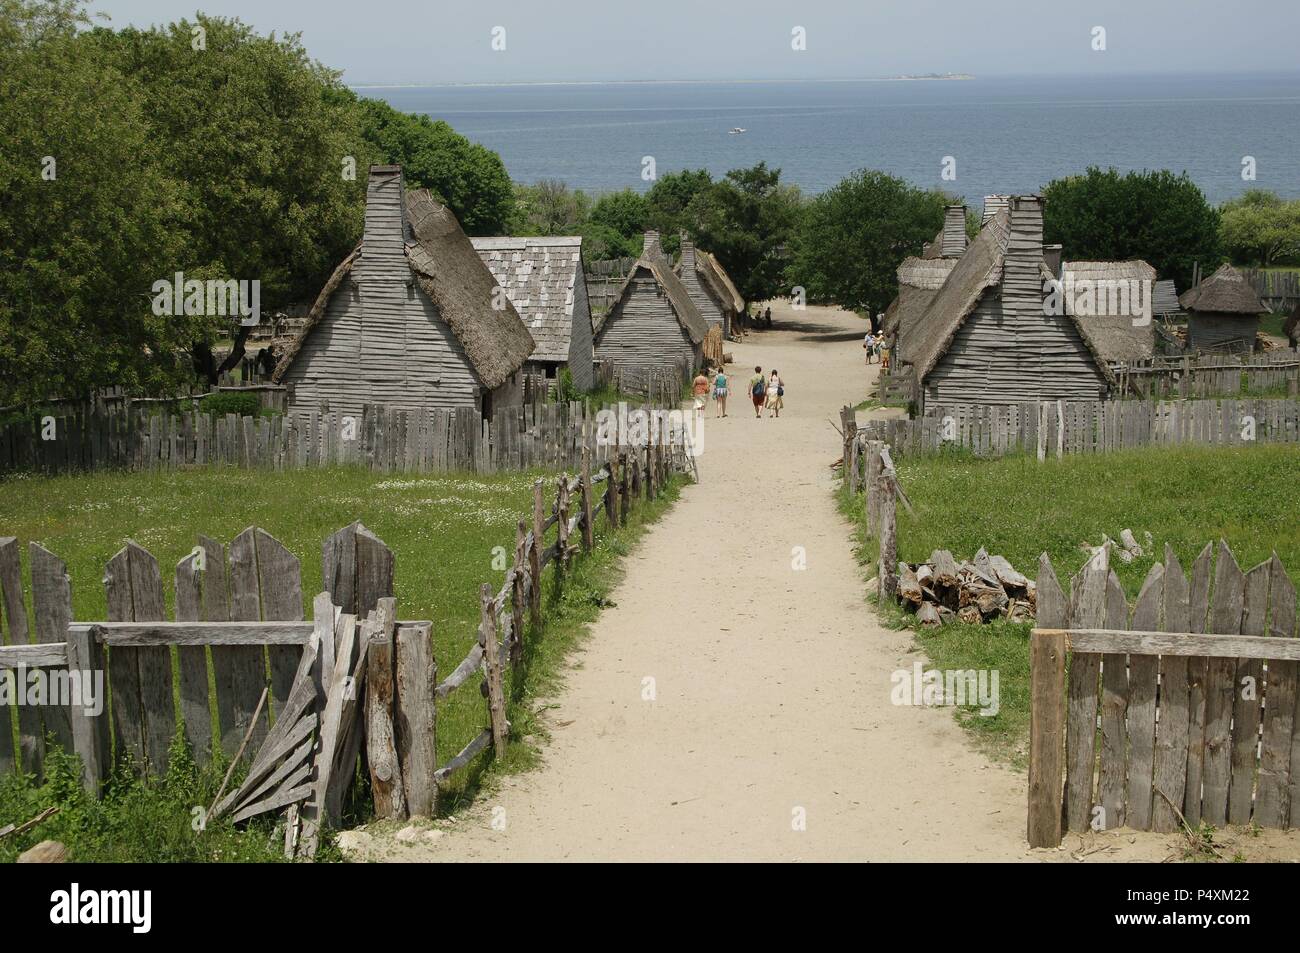 Plimoth Plantation or Historical Museum. Is a living museum in that shows the original settlement of the Plymouth Colony established in the 17th century by English colonists. English village. Plymouth. Massachusetts. United States. Stock Photo